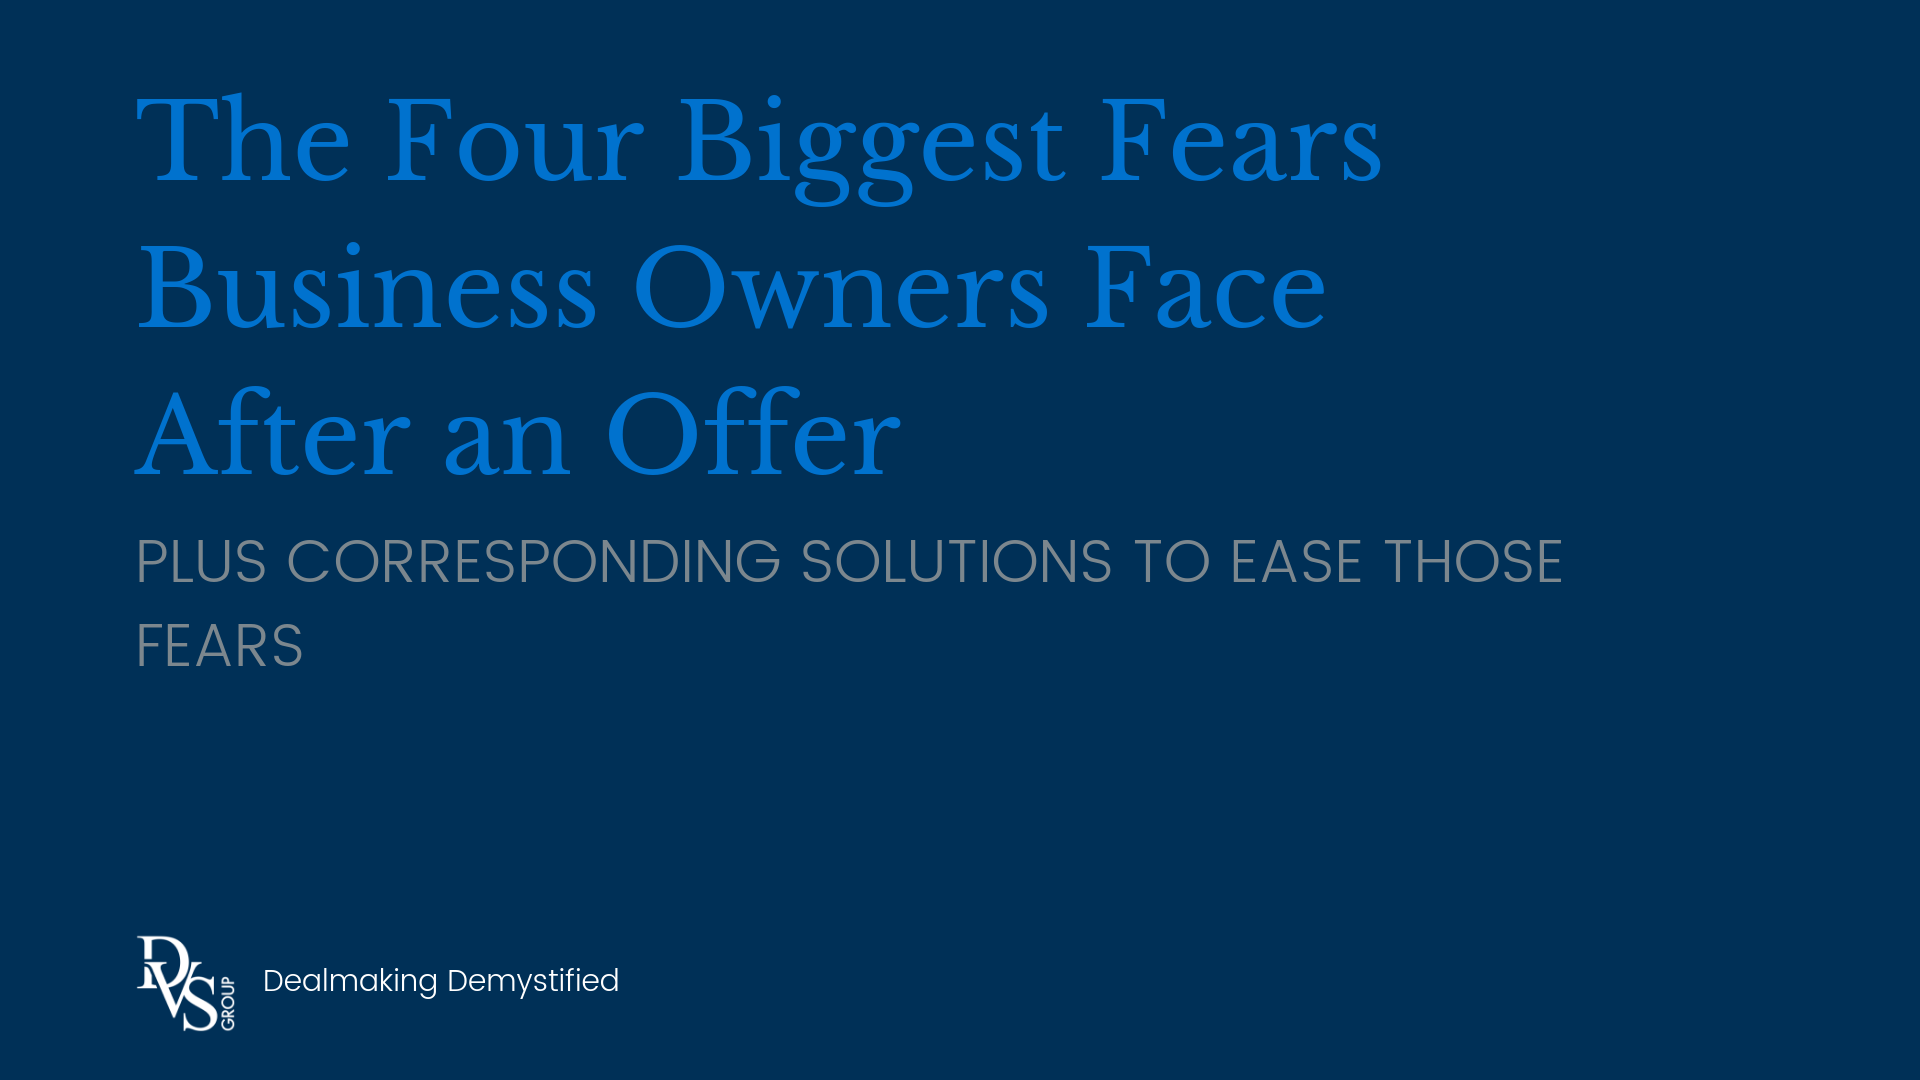 The Four Biggest Fears Business Owners Face After an Offer